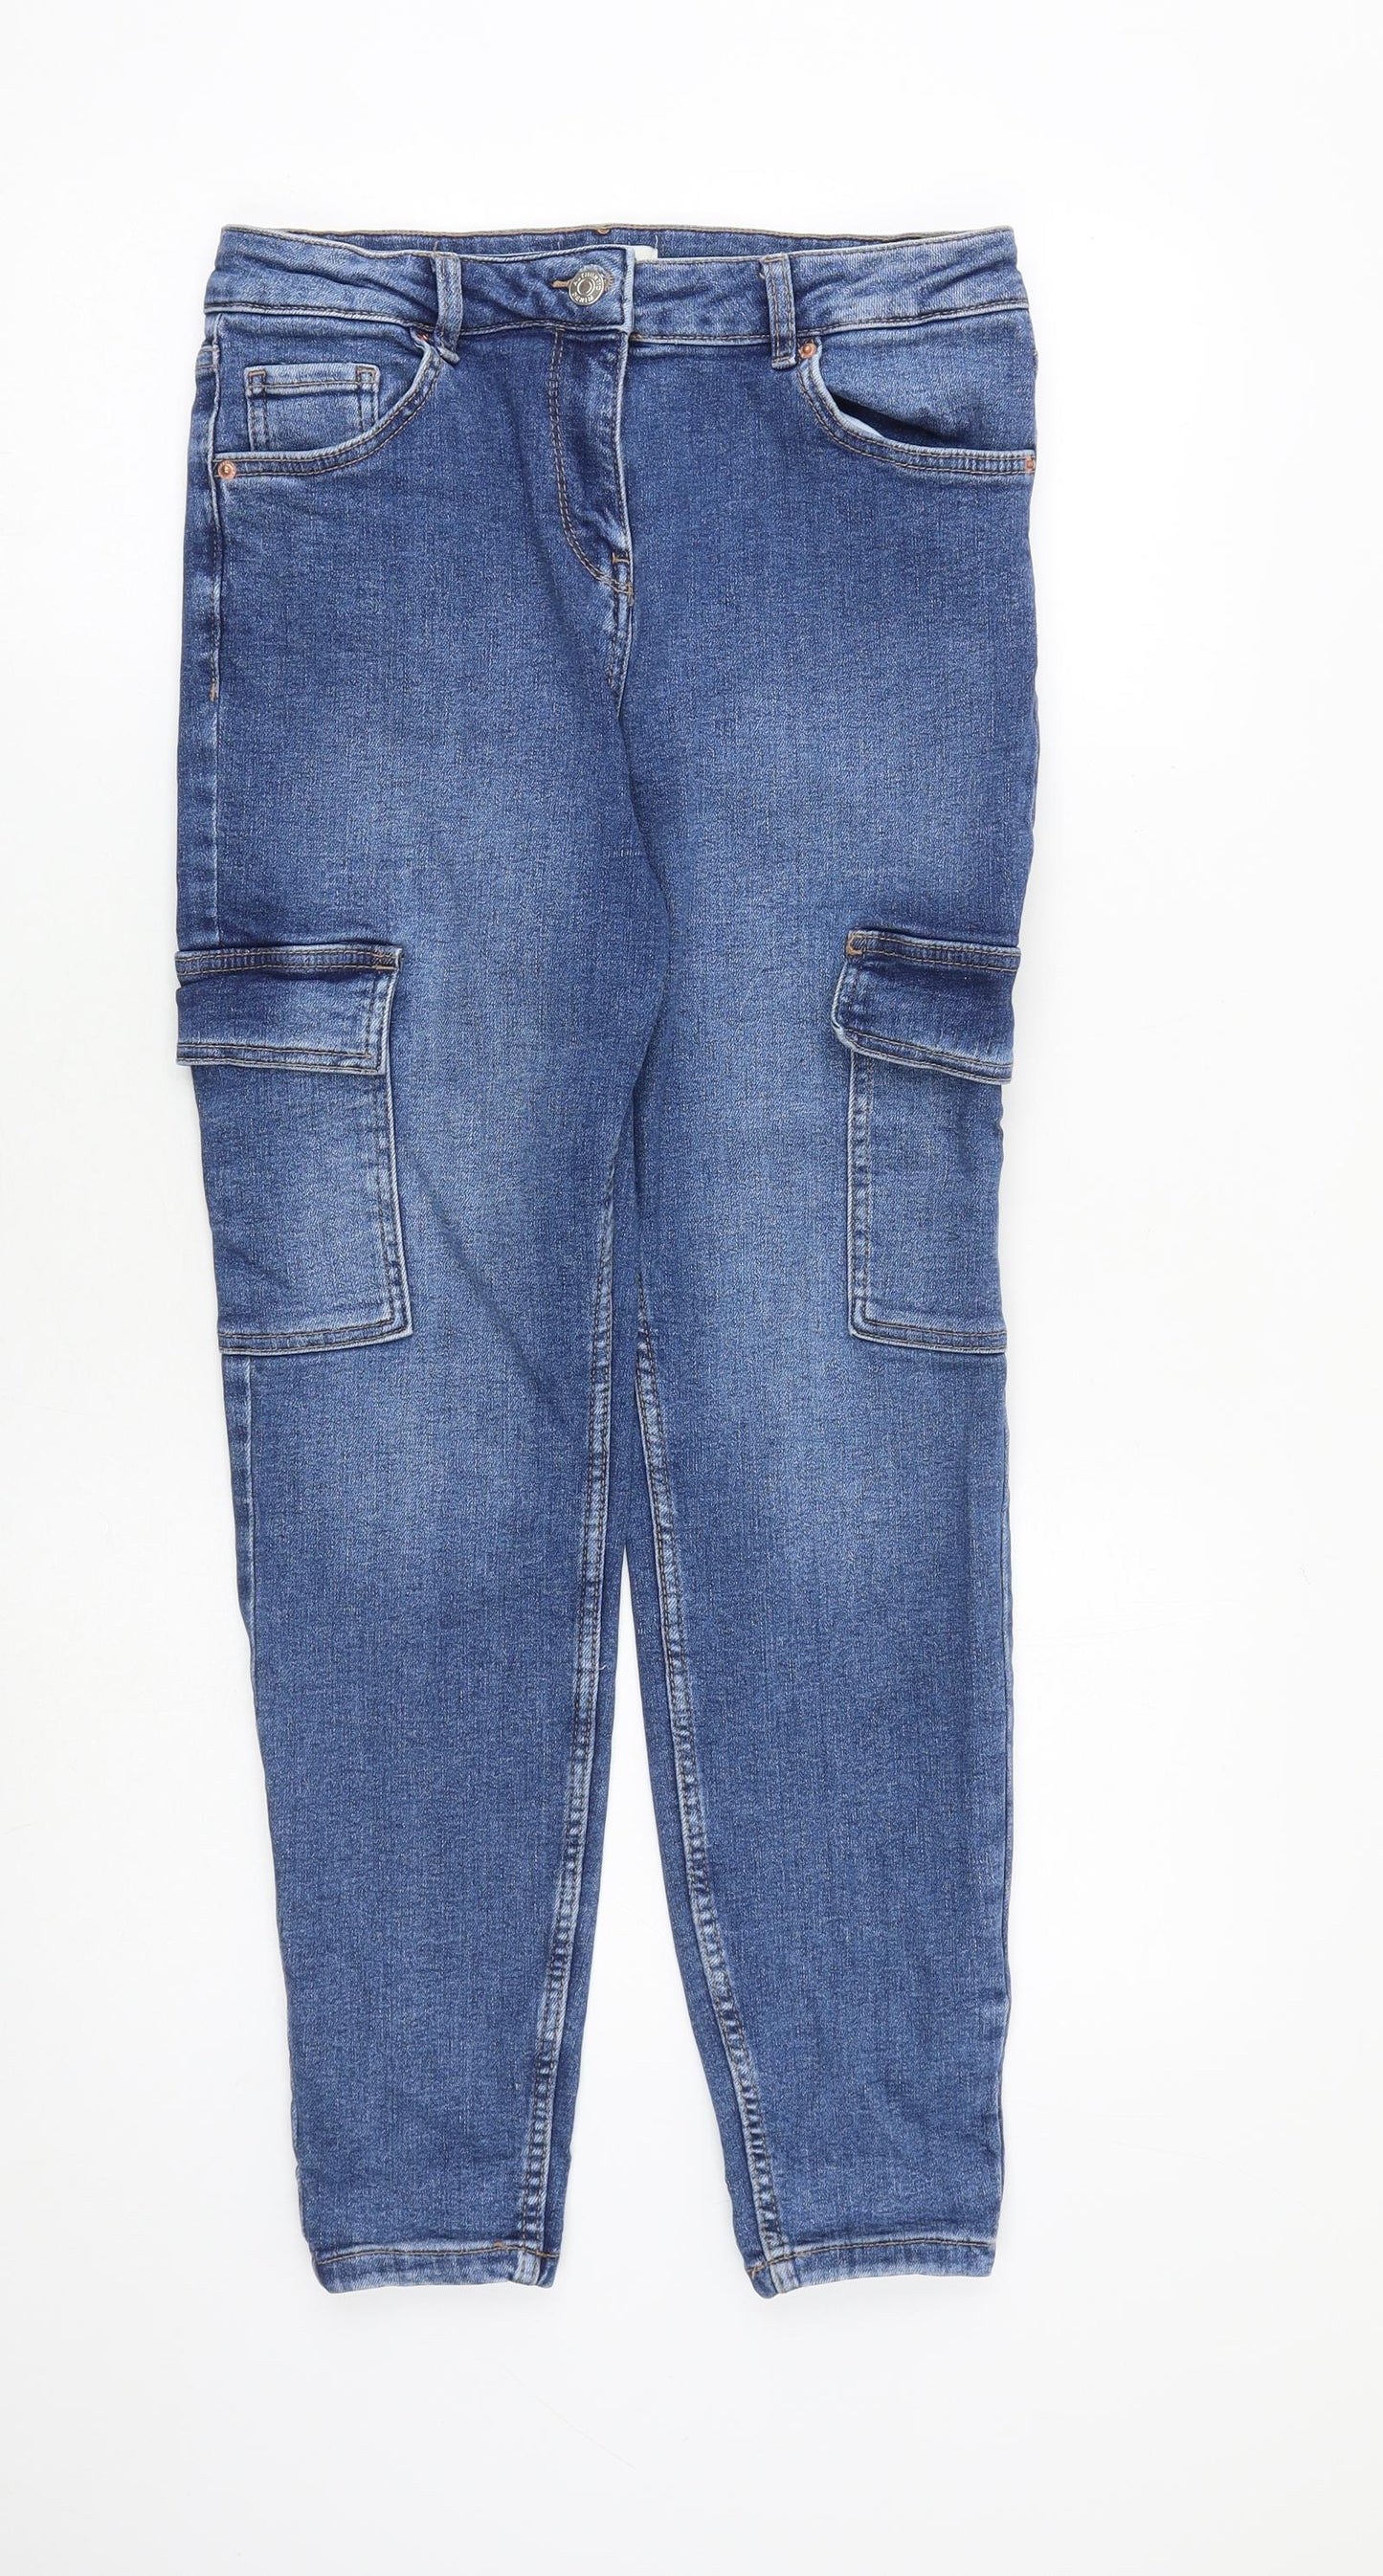 Papaya Womens Blue Cotton Tapered Jeans Size 12 L27 in Regular Zip - Cargo